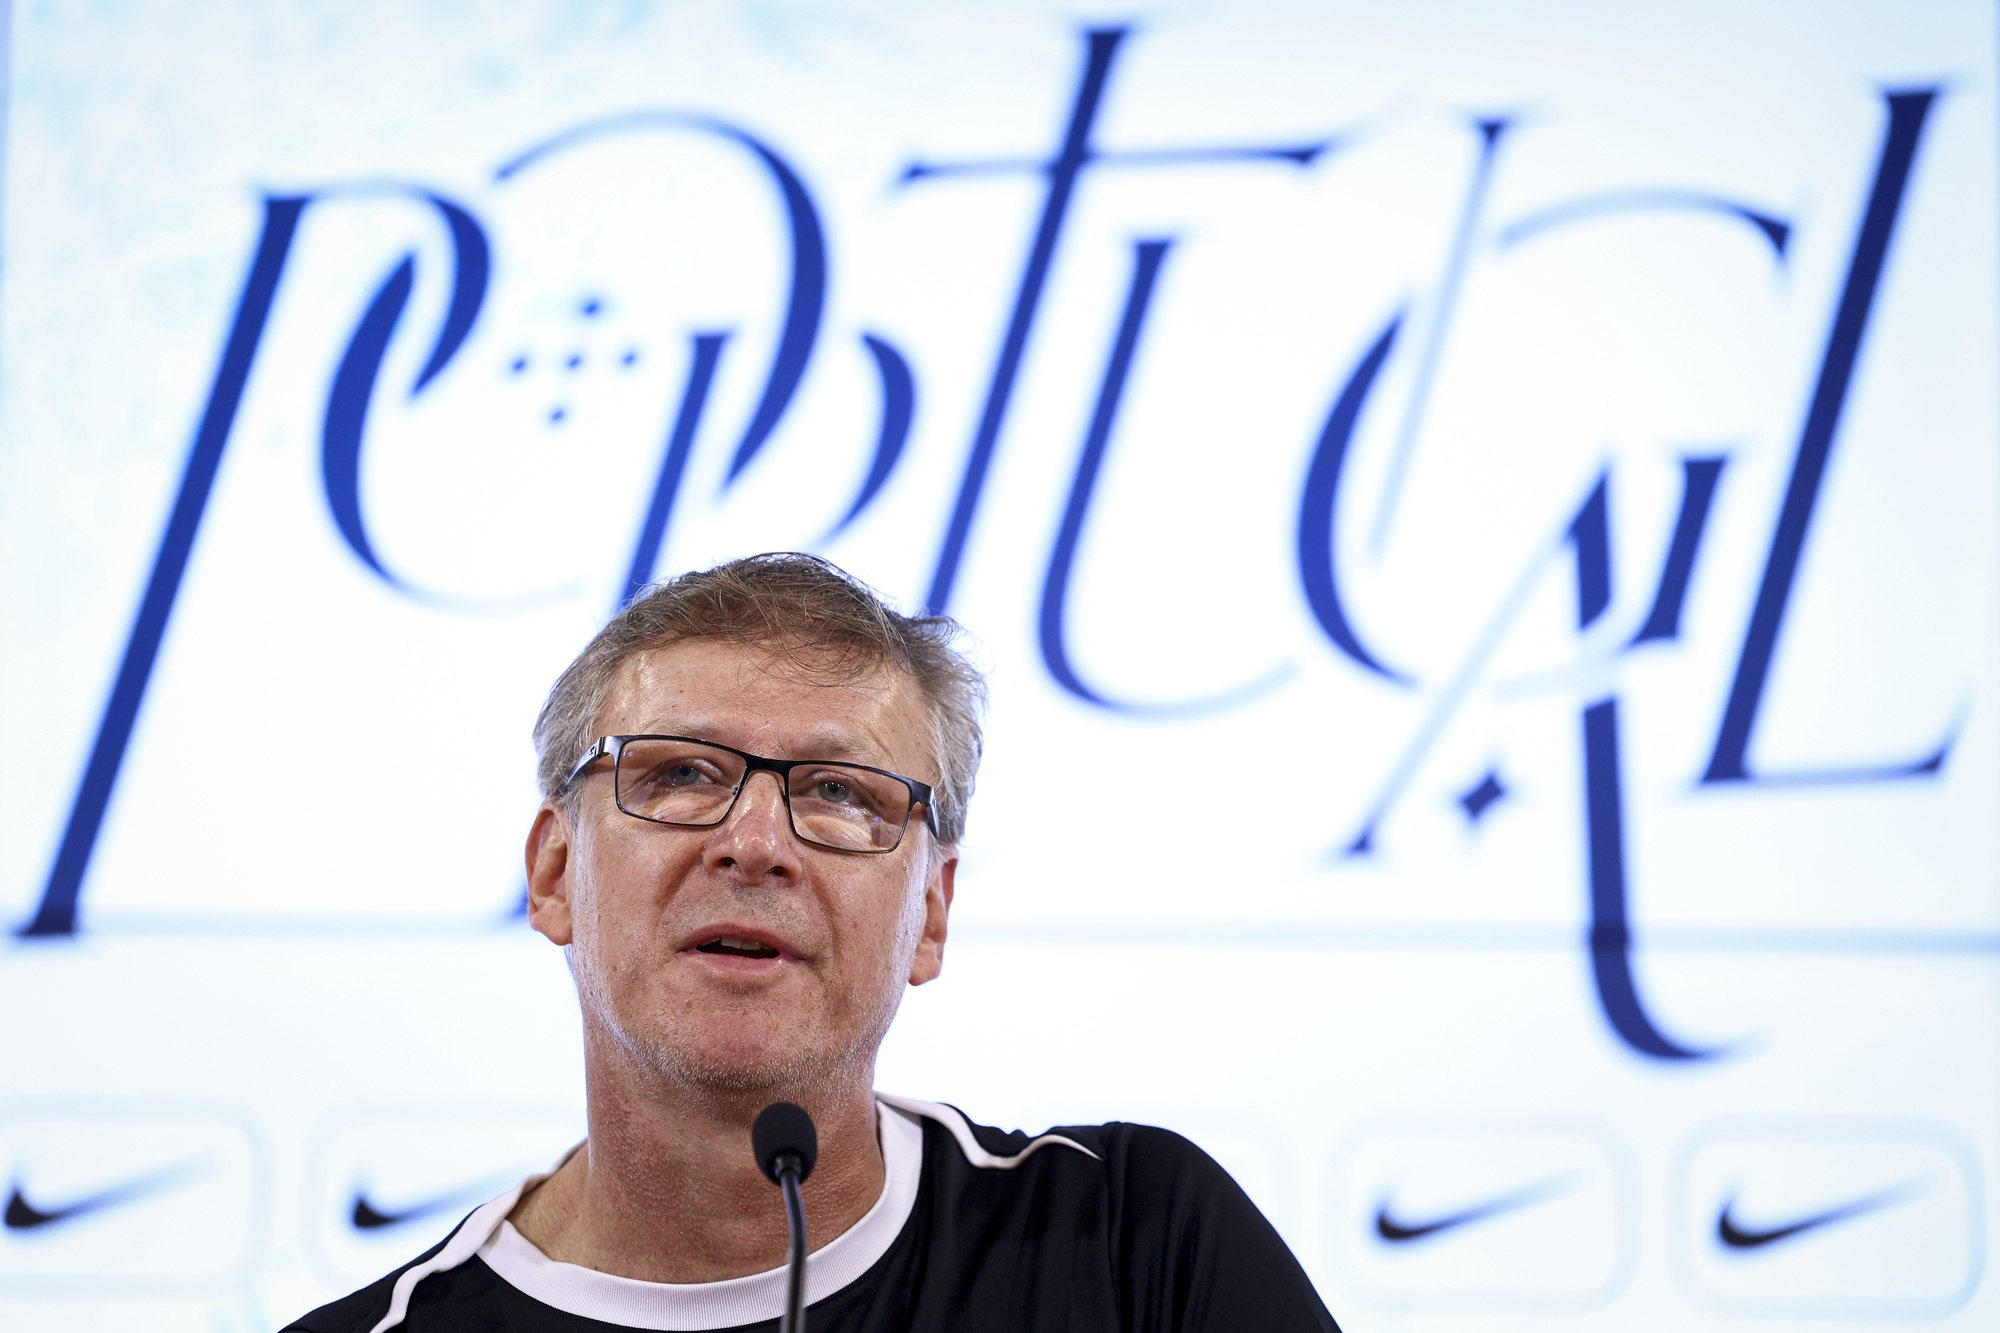 Finland national soccer team head coach Markku Kanerva attends a press conference at Alvalade stadium in Lisbon, Portugal, 03 June 2024. Finland will play tomorrow a friendly match against Portugal. FILIPE AMORIM/LUSA